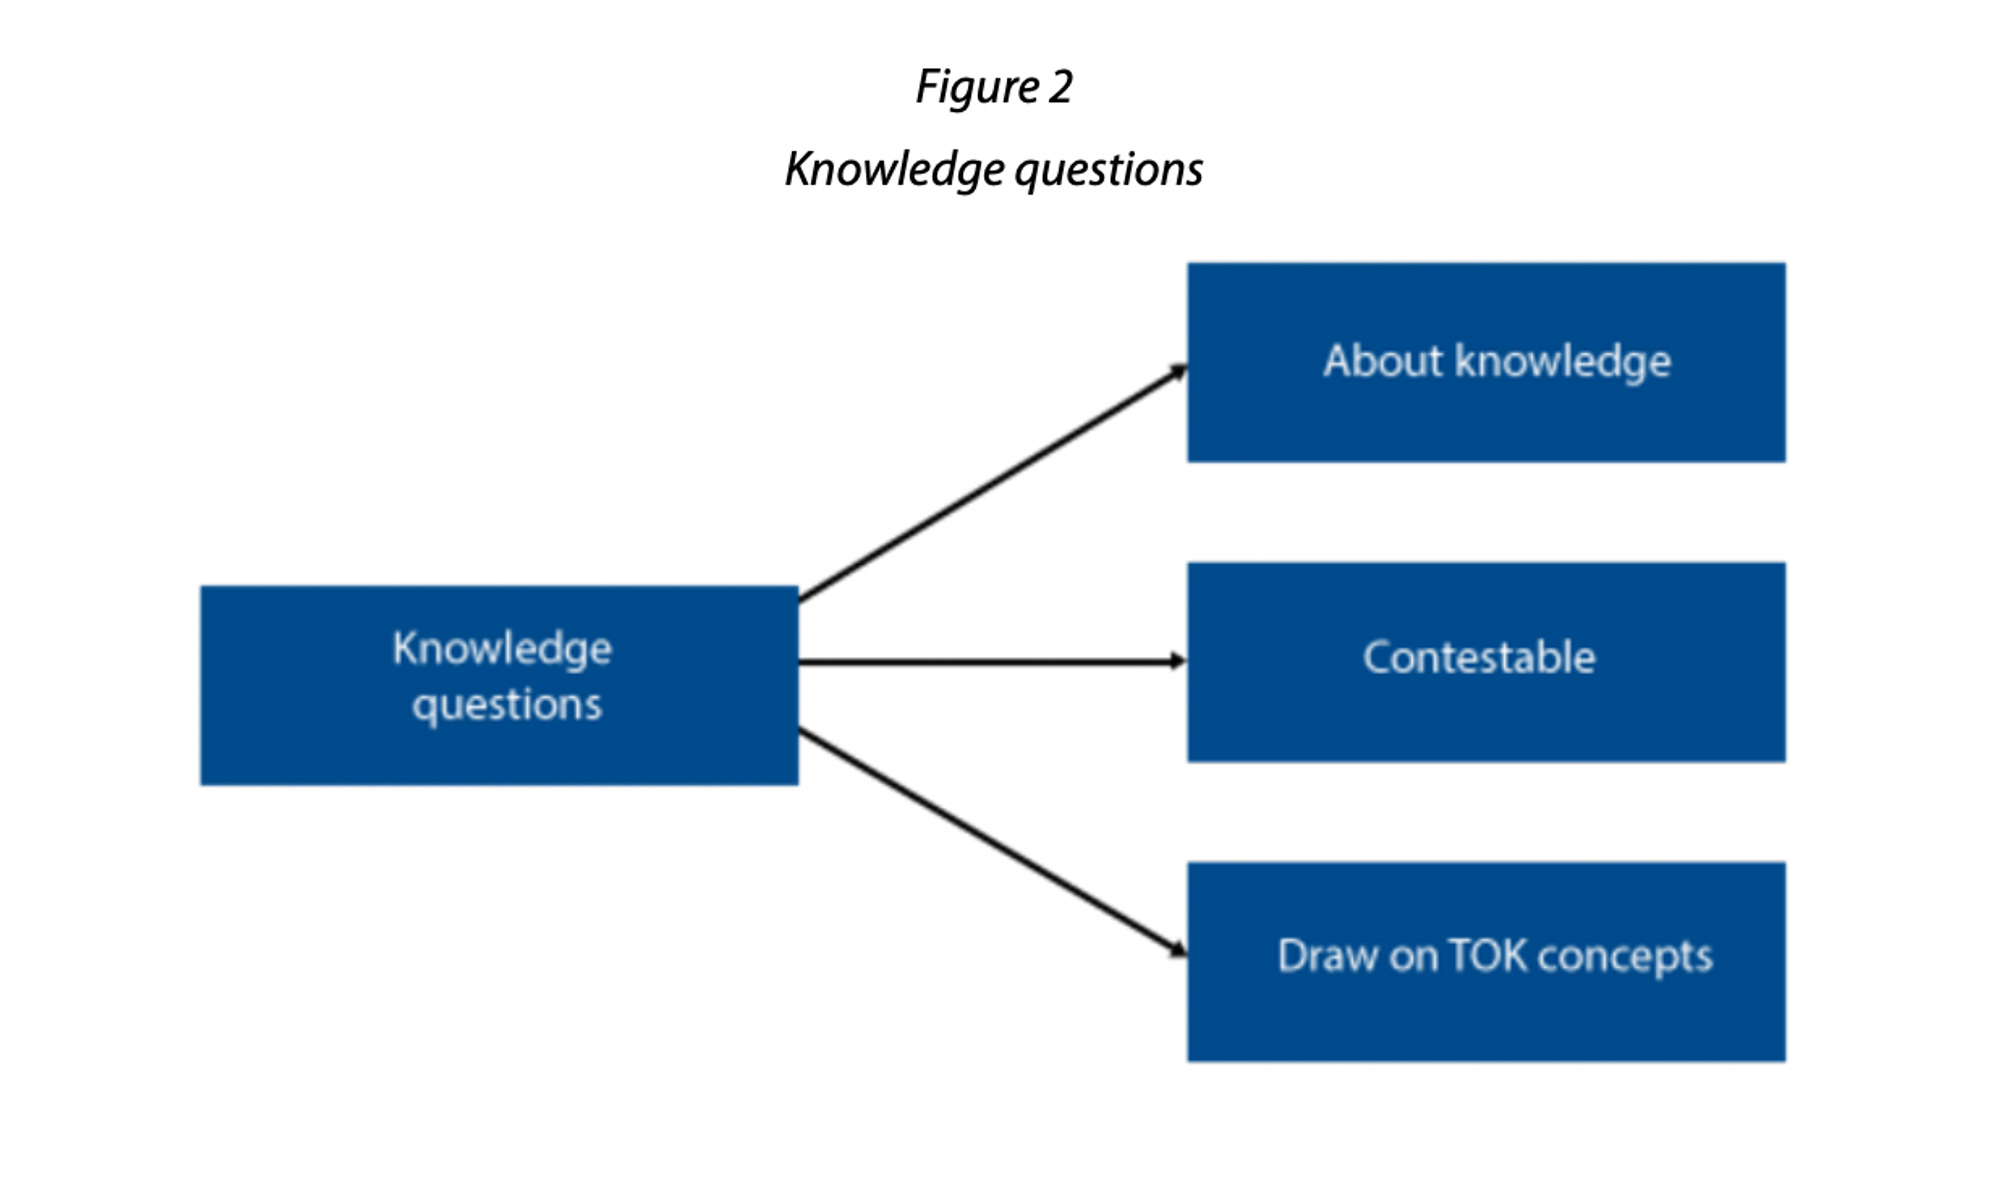 Knowledge questions